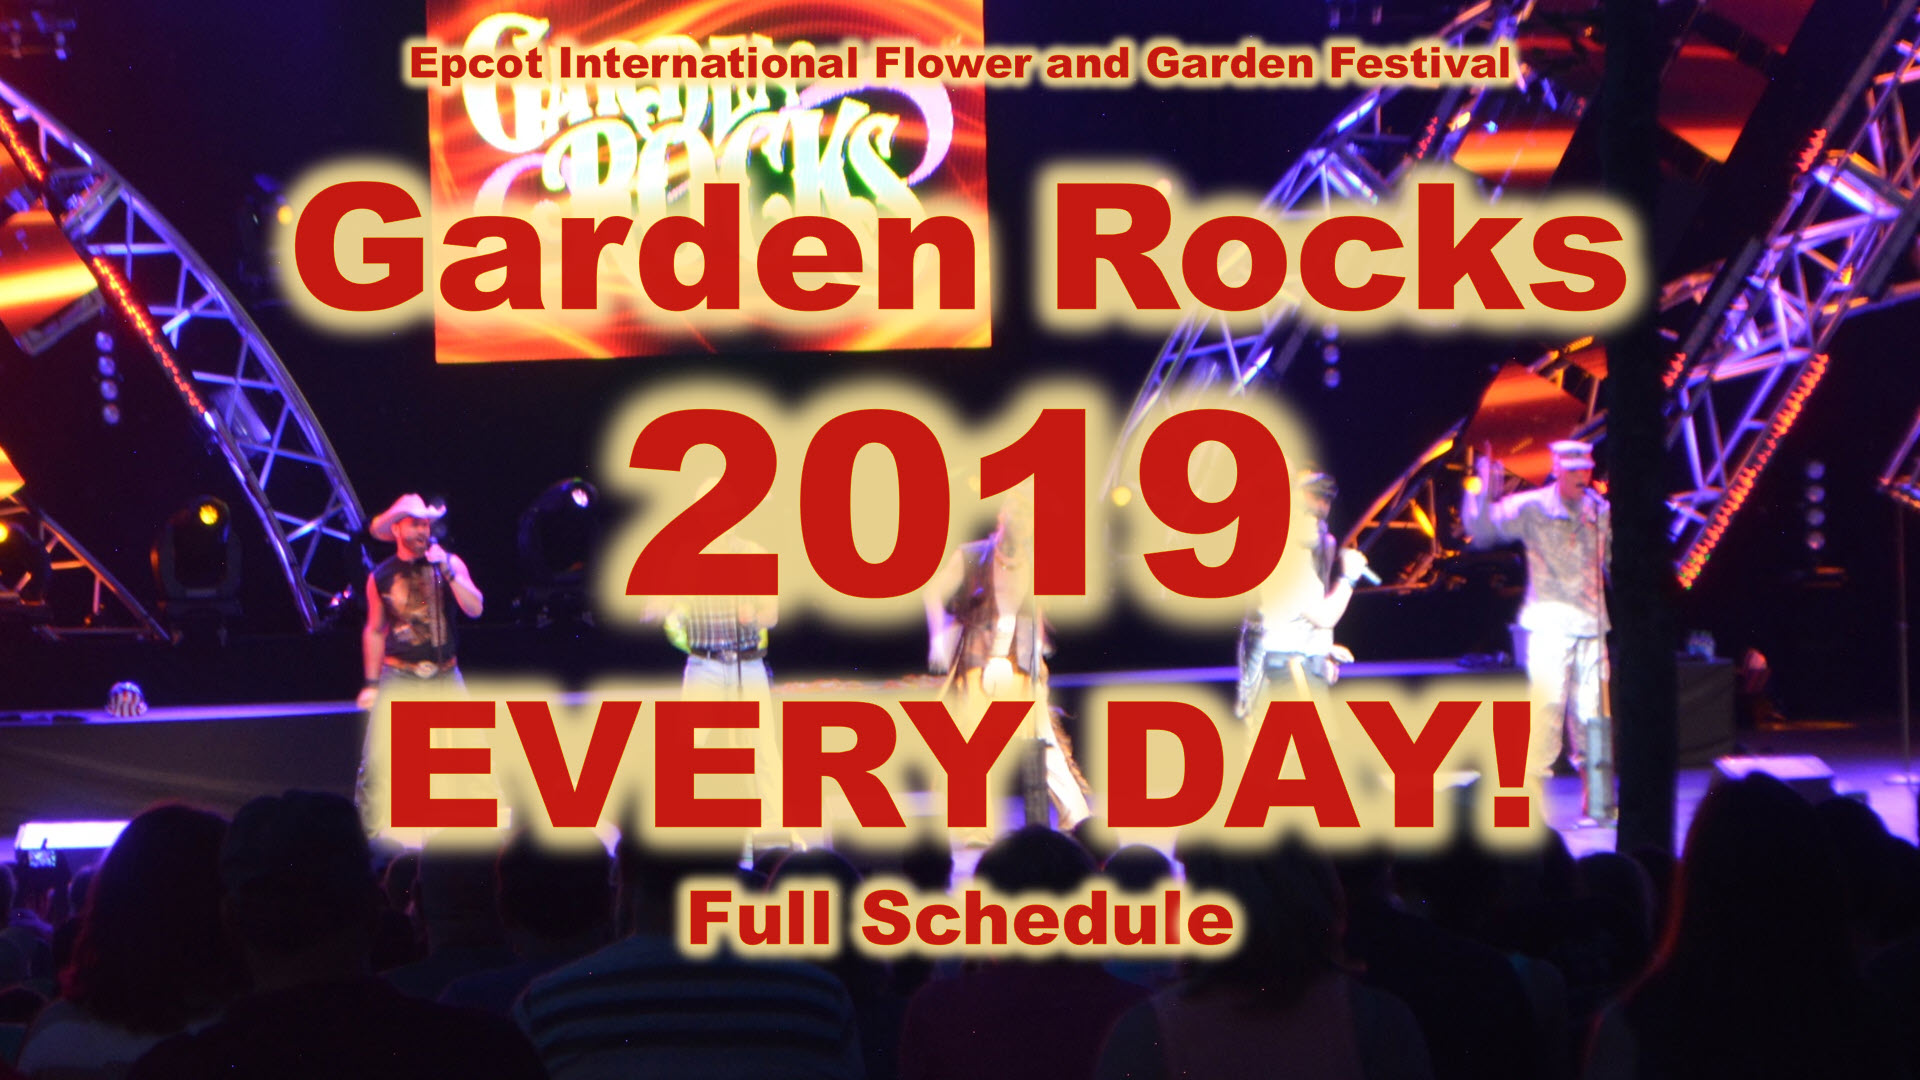 2019 flower and garden rocks everyday with 270 concerts!!!!! — the